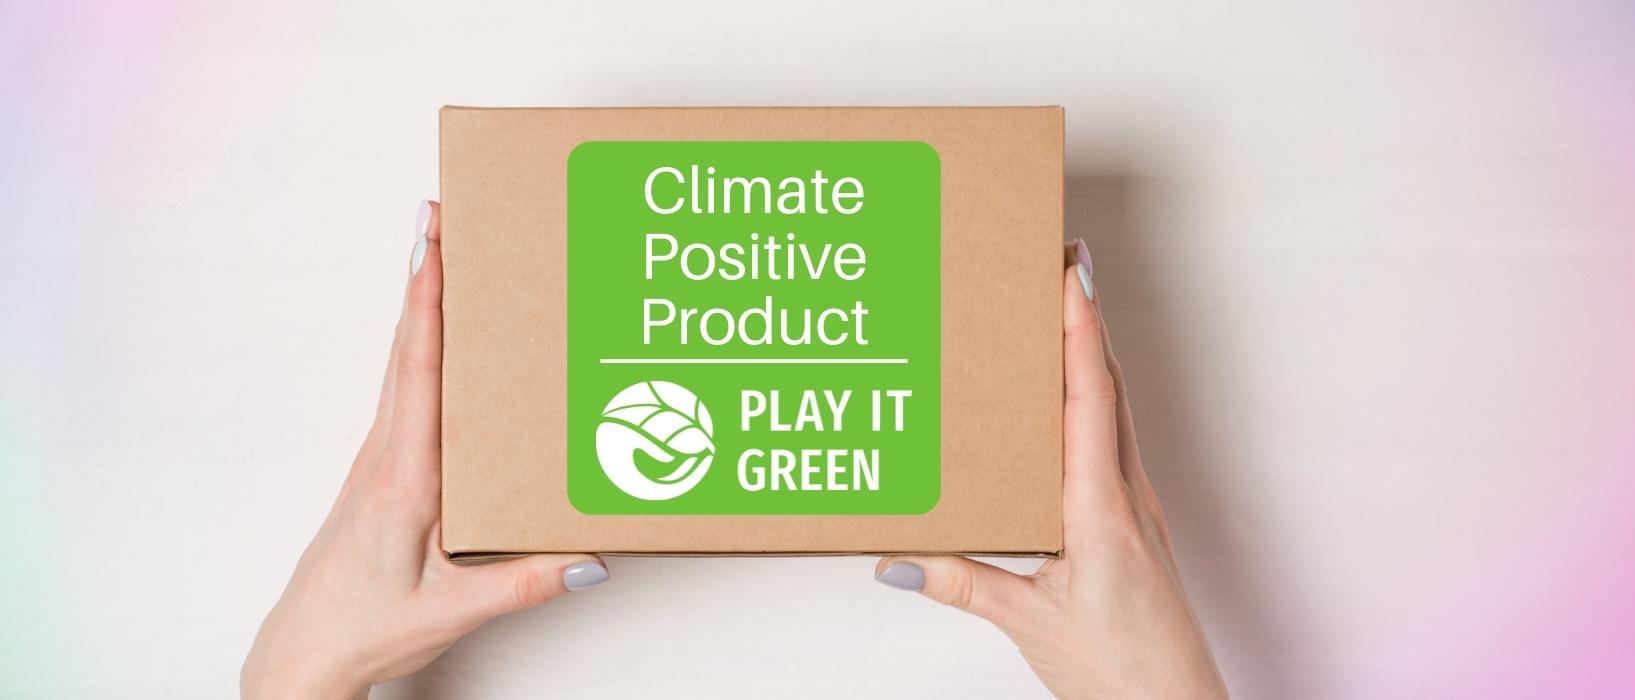 woman holding a cardboard box with Play it Green Climate Positive Product badge on it